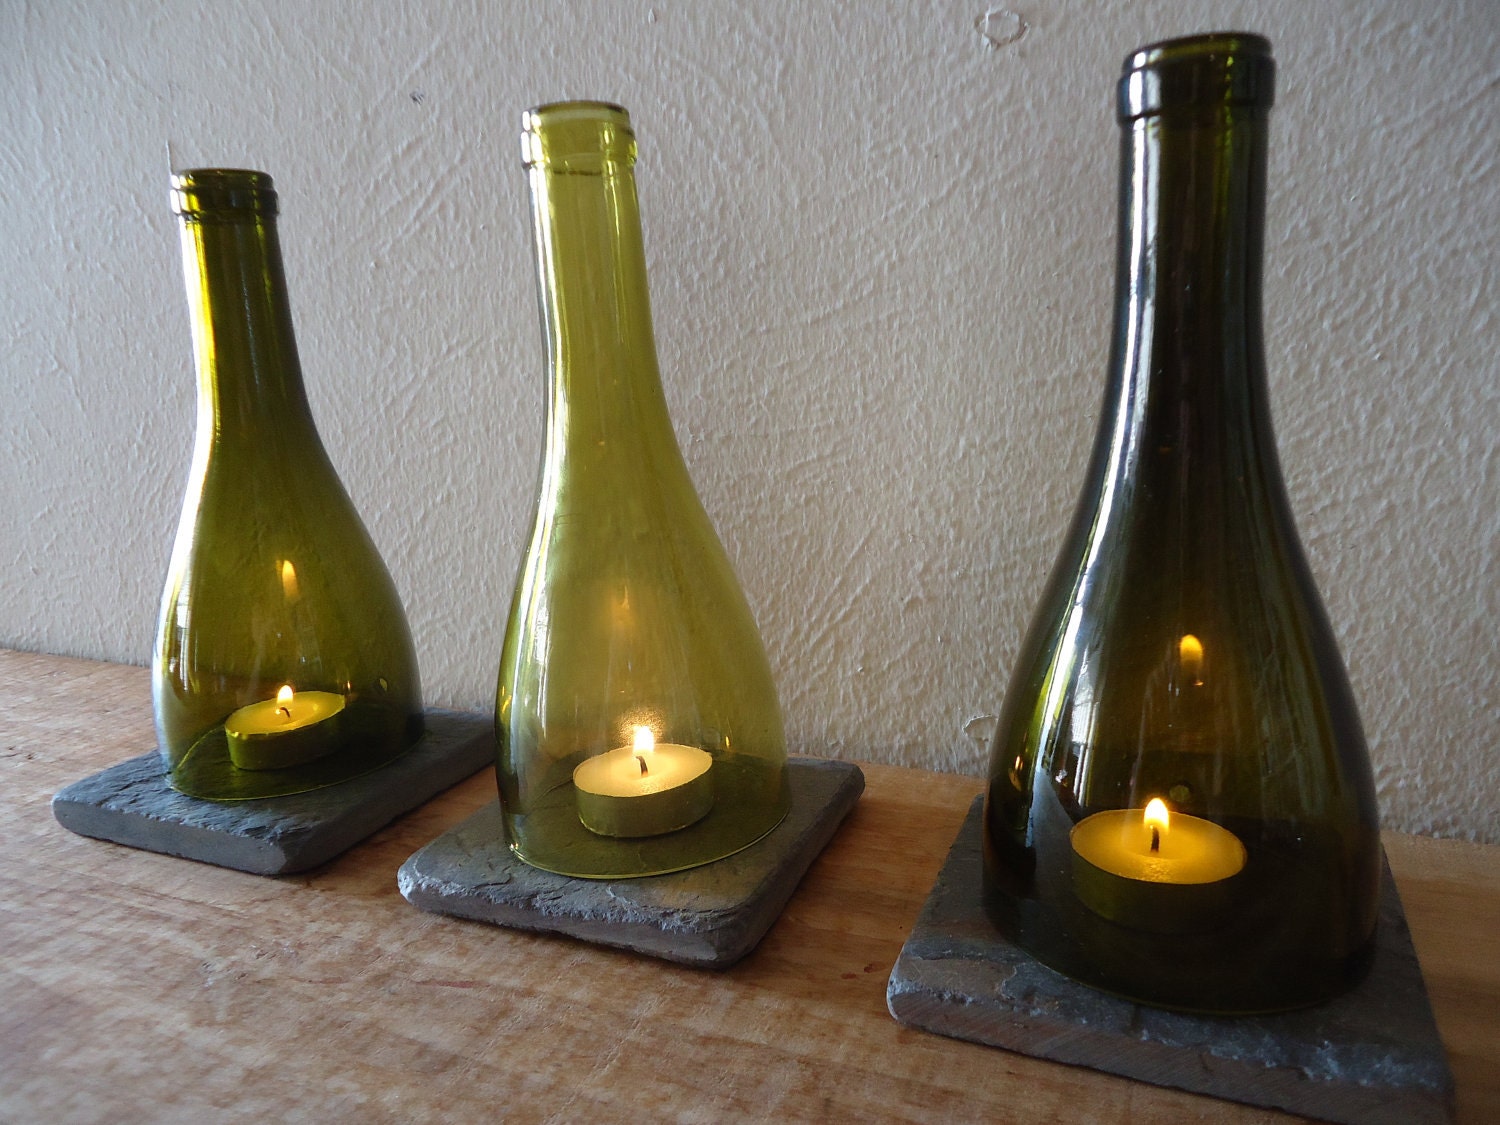 Tea Light Candle Holders Hurricane Lamps Lanterns made from Upcycled Wine Bottles Large Quantities Available